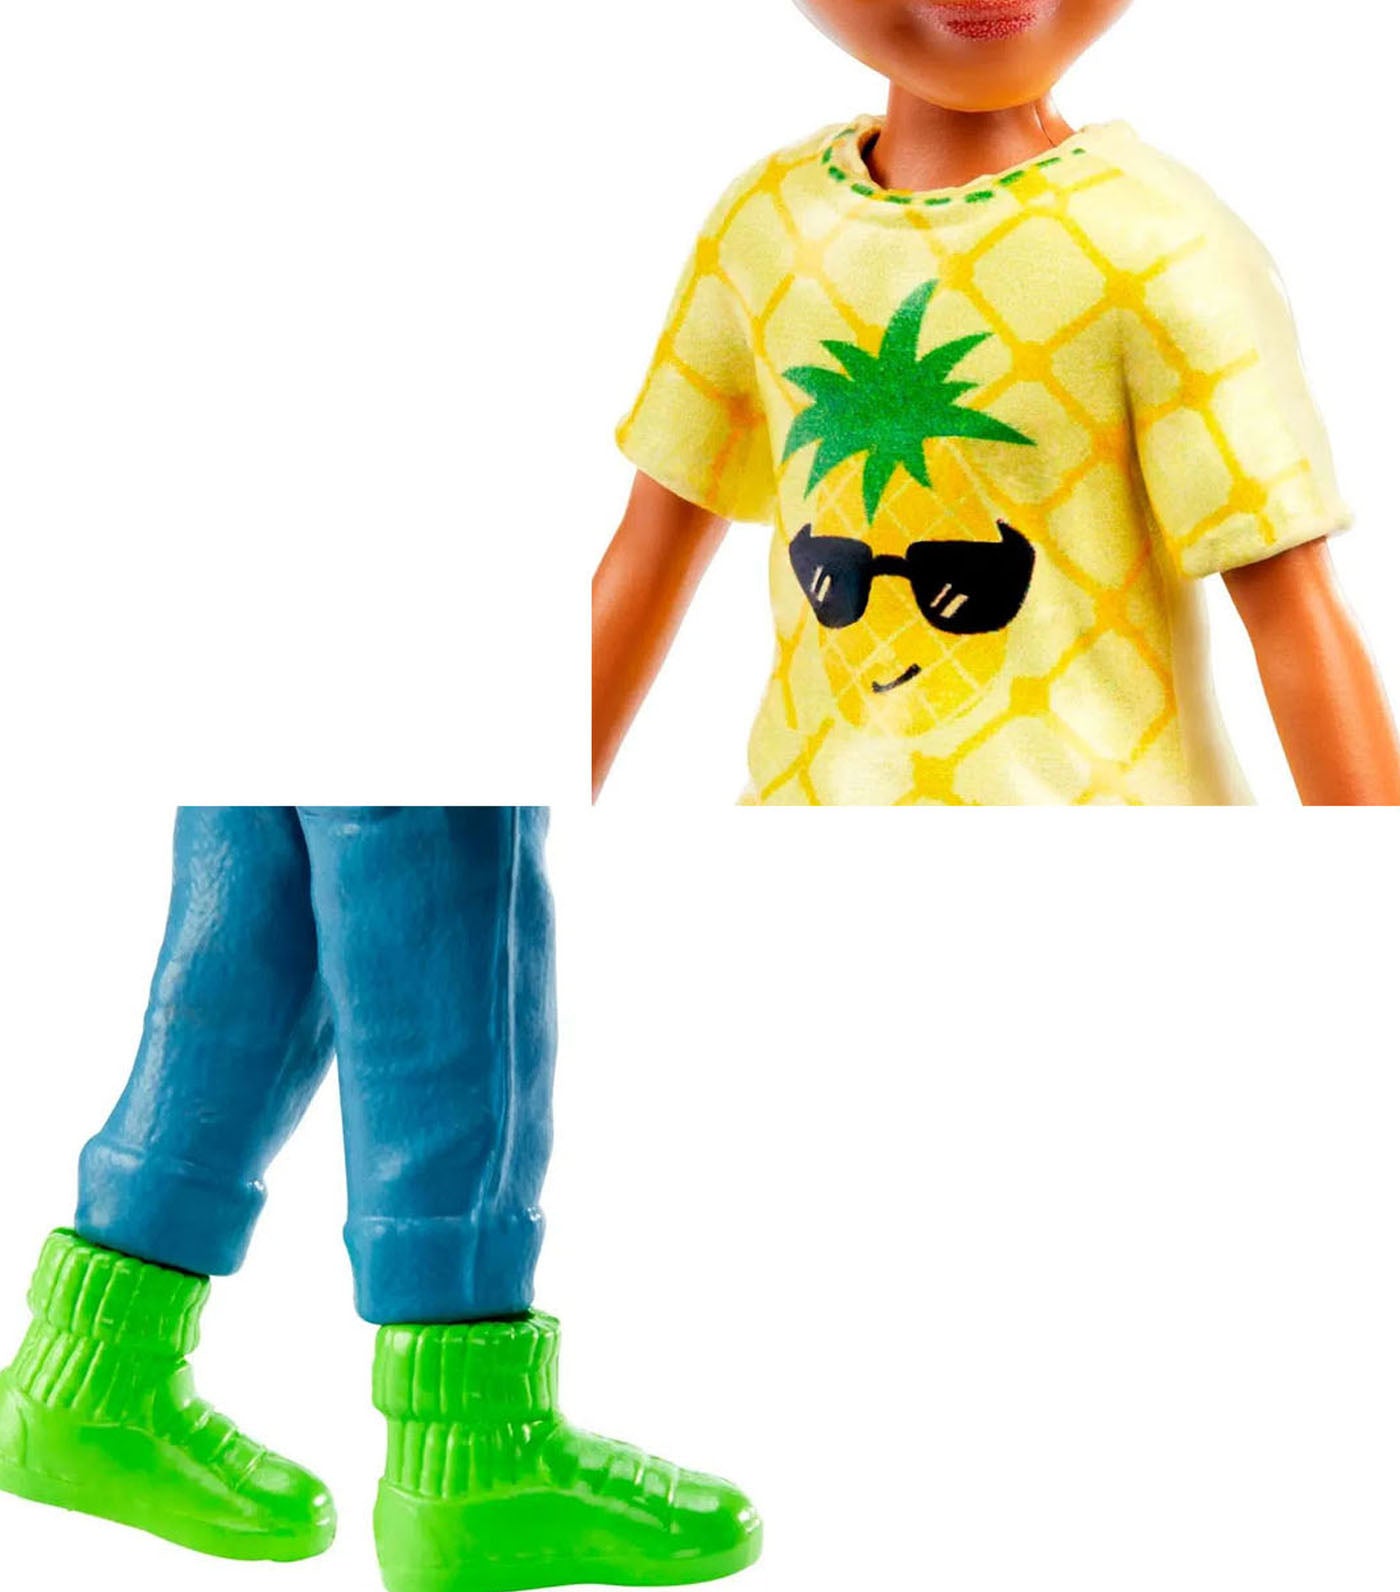 Impulse 3in Doll - Nicholas with Pineapple Shirt